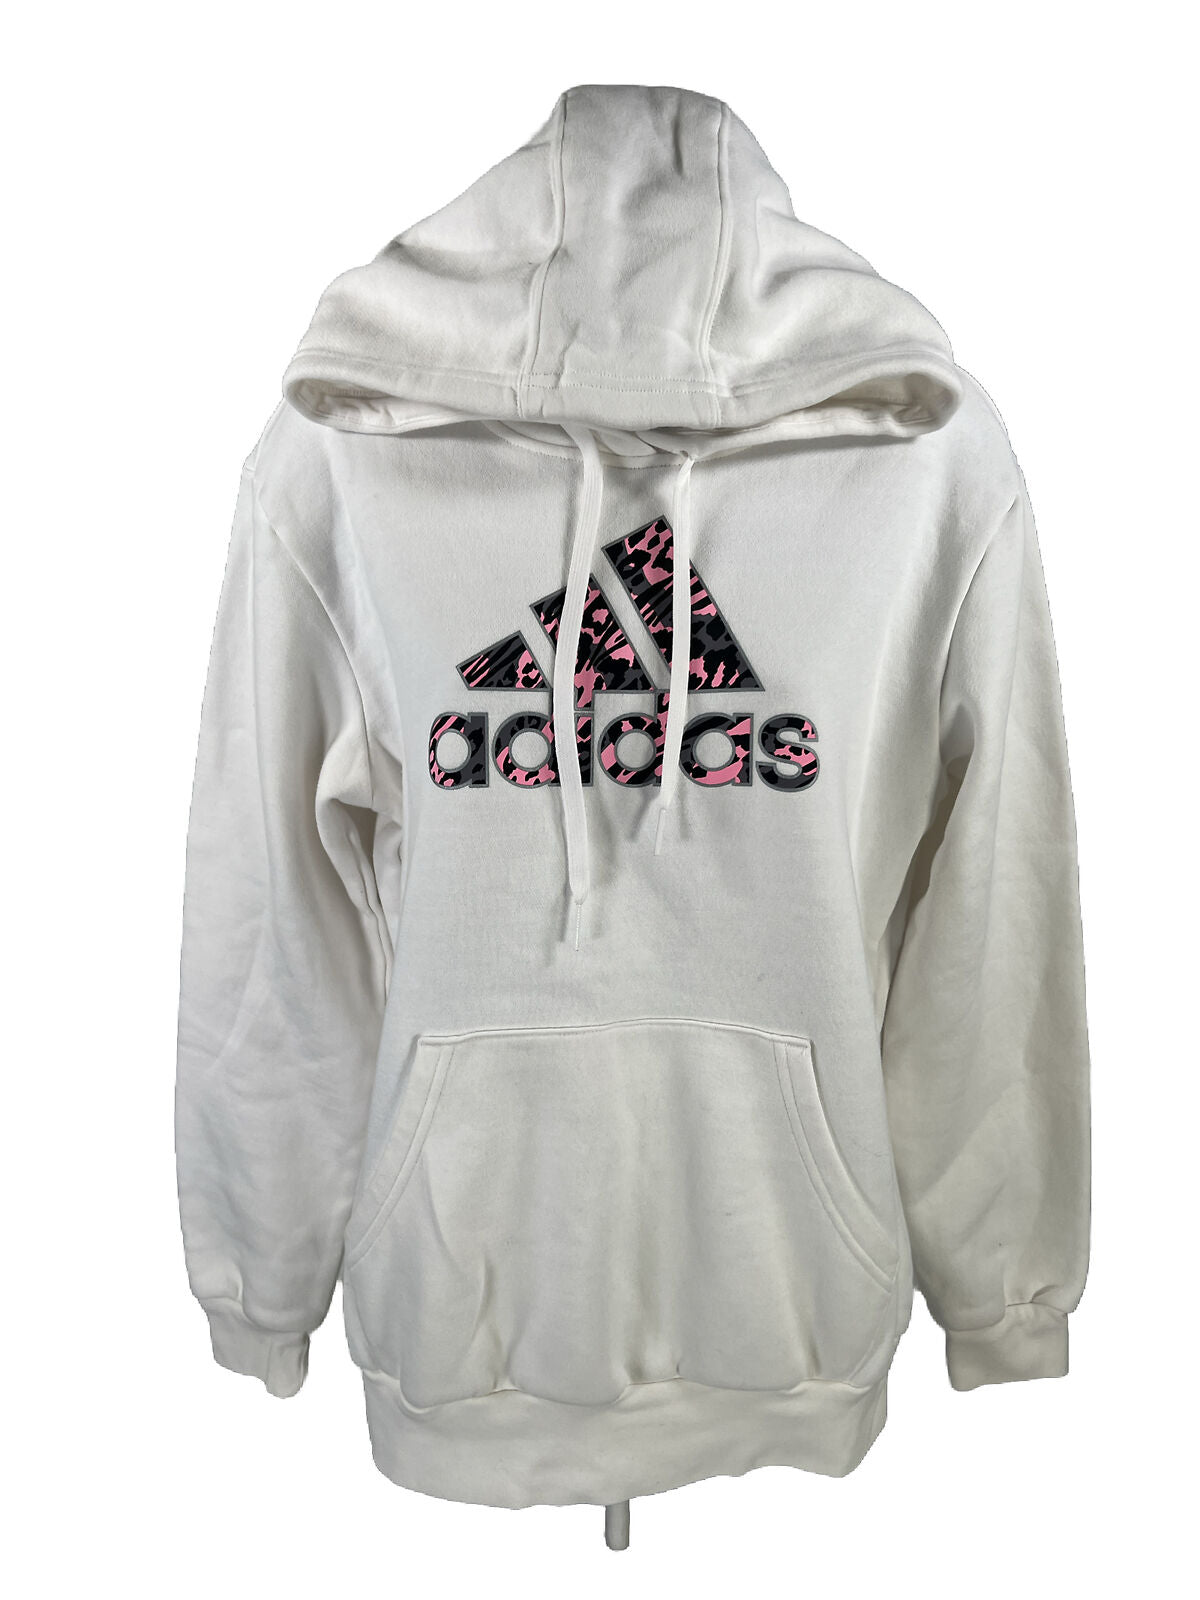 adidas Women's White Long Sleeve Pullover Hoodie - S